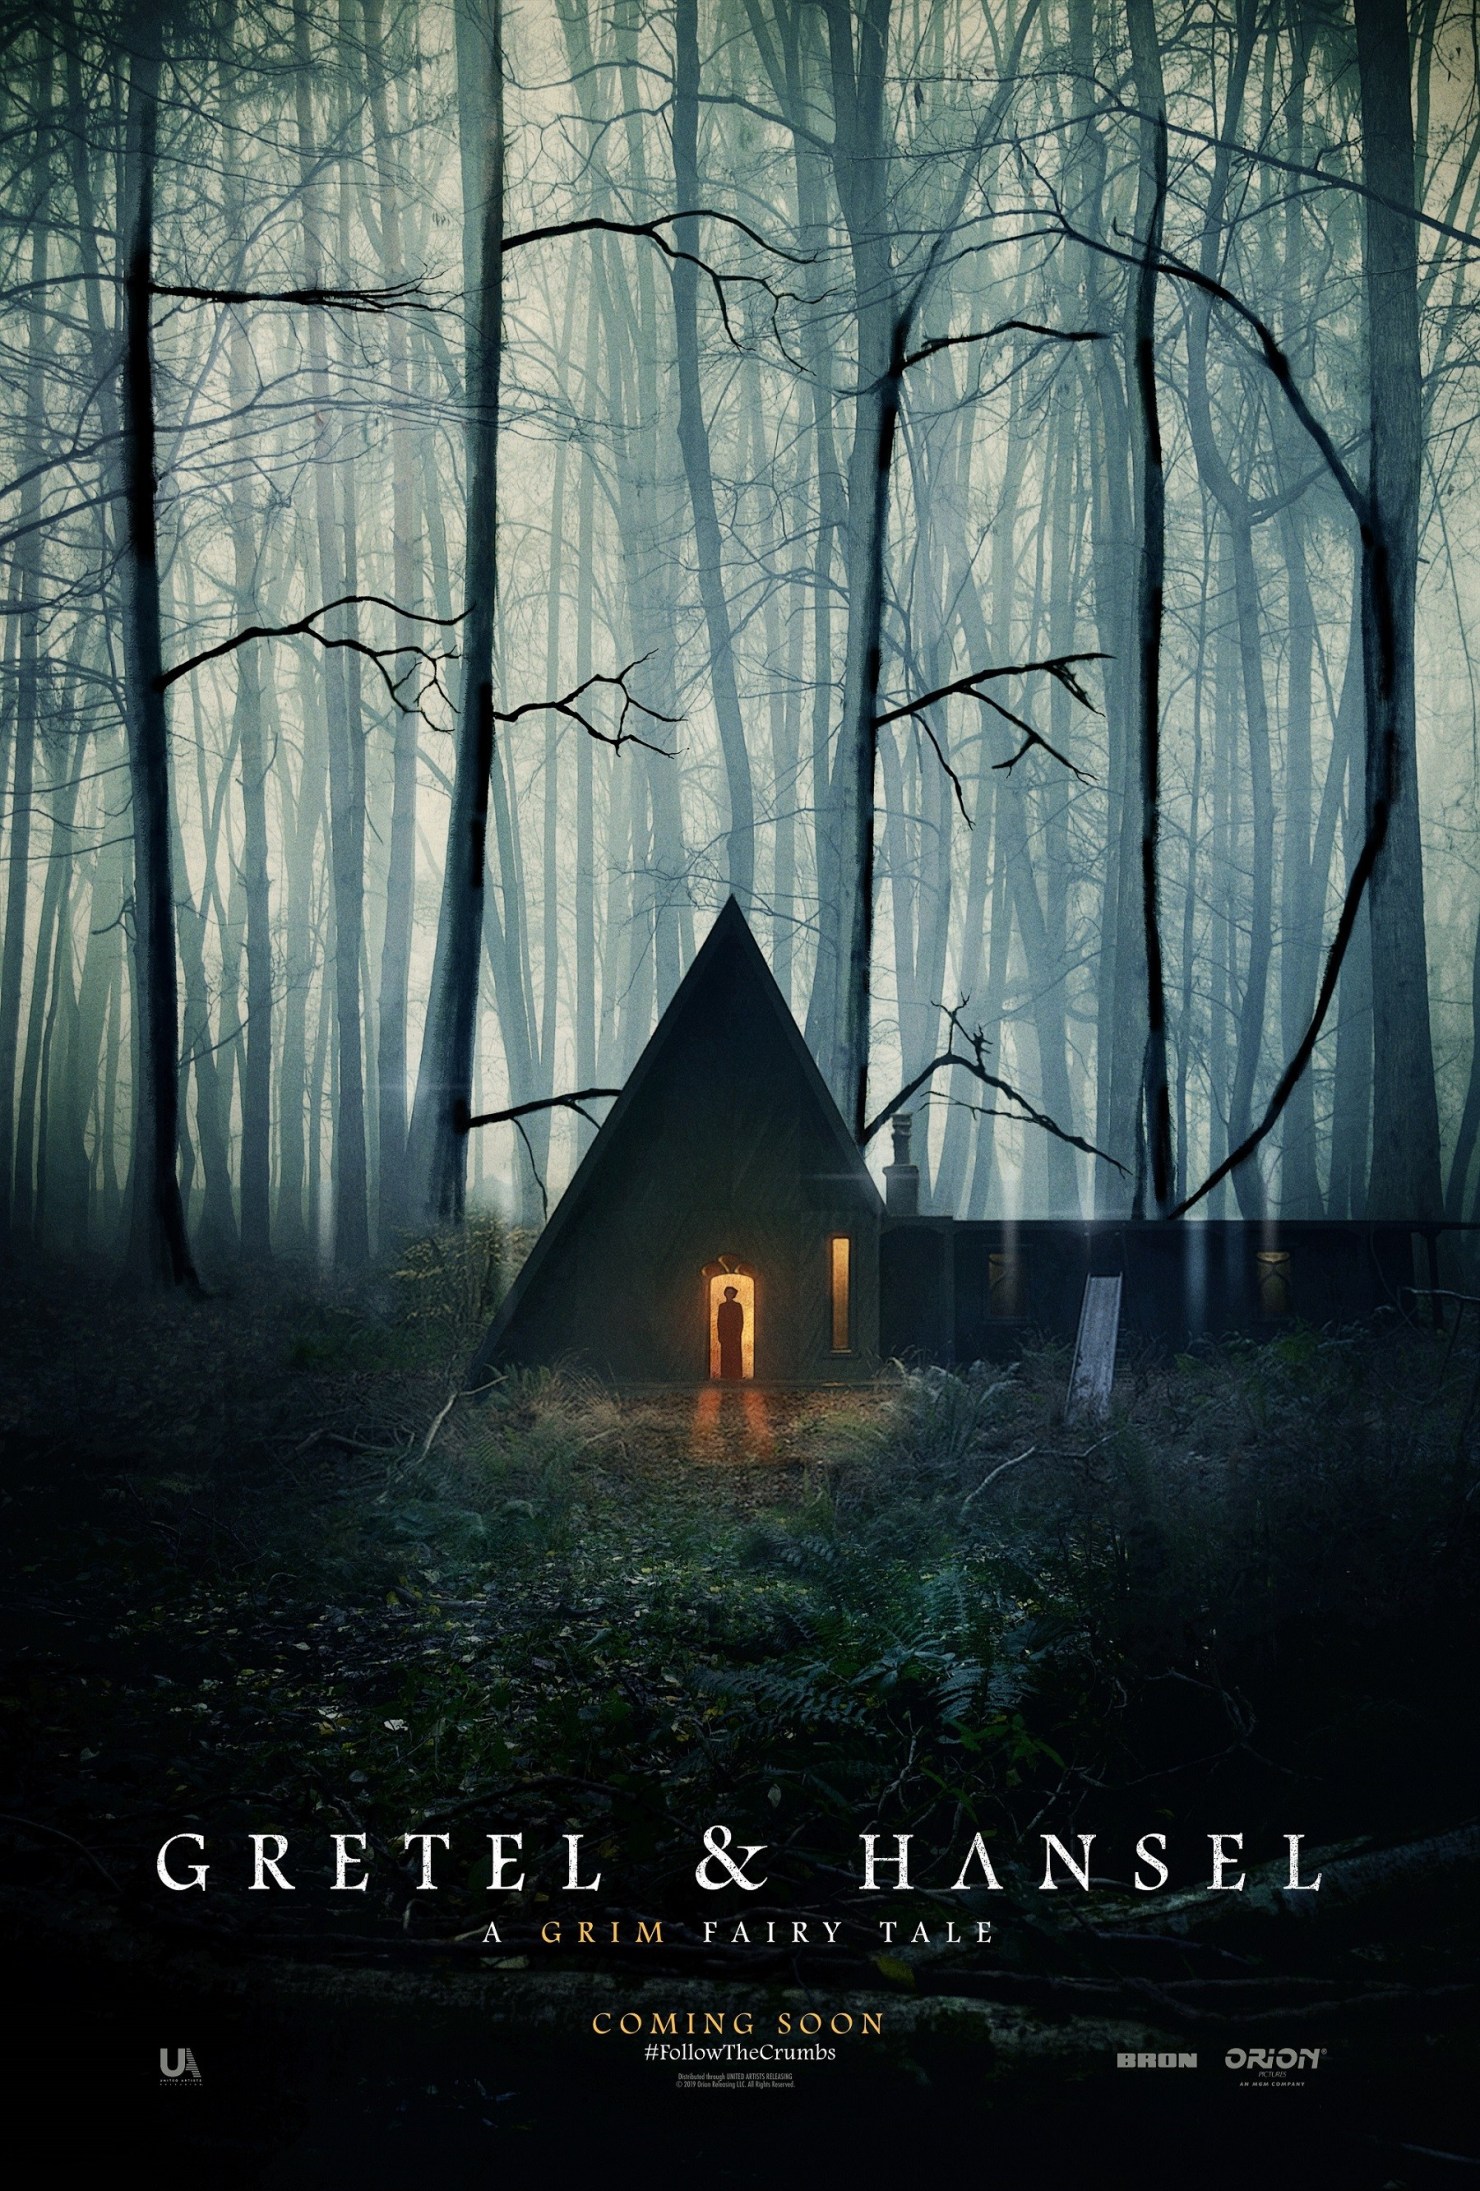 follow-the-crumbs-to-the-trailer-for-the-grimm-fairytale-horror-thriller-gretal-hansel2